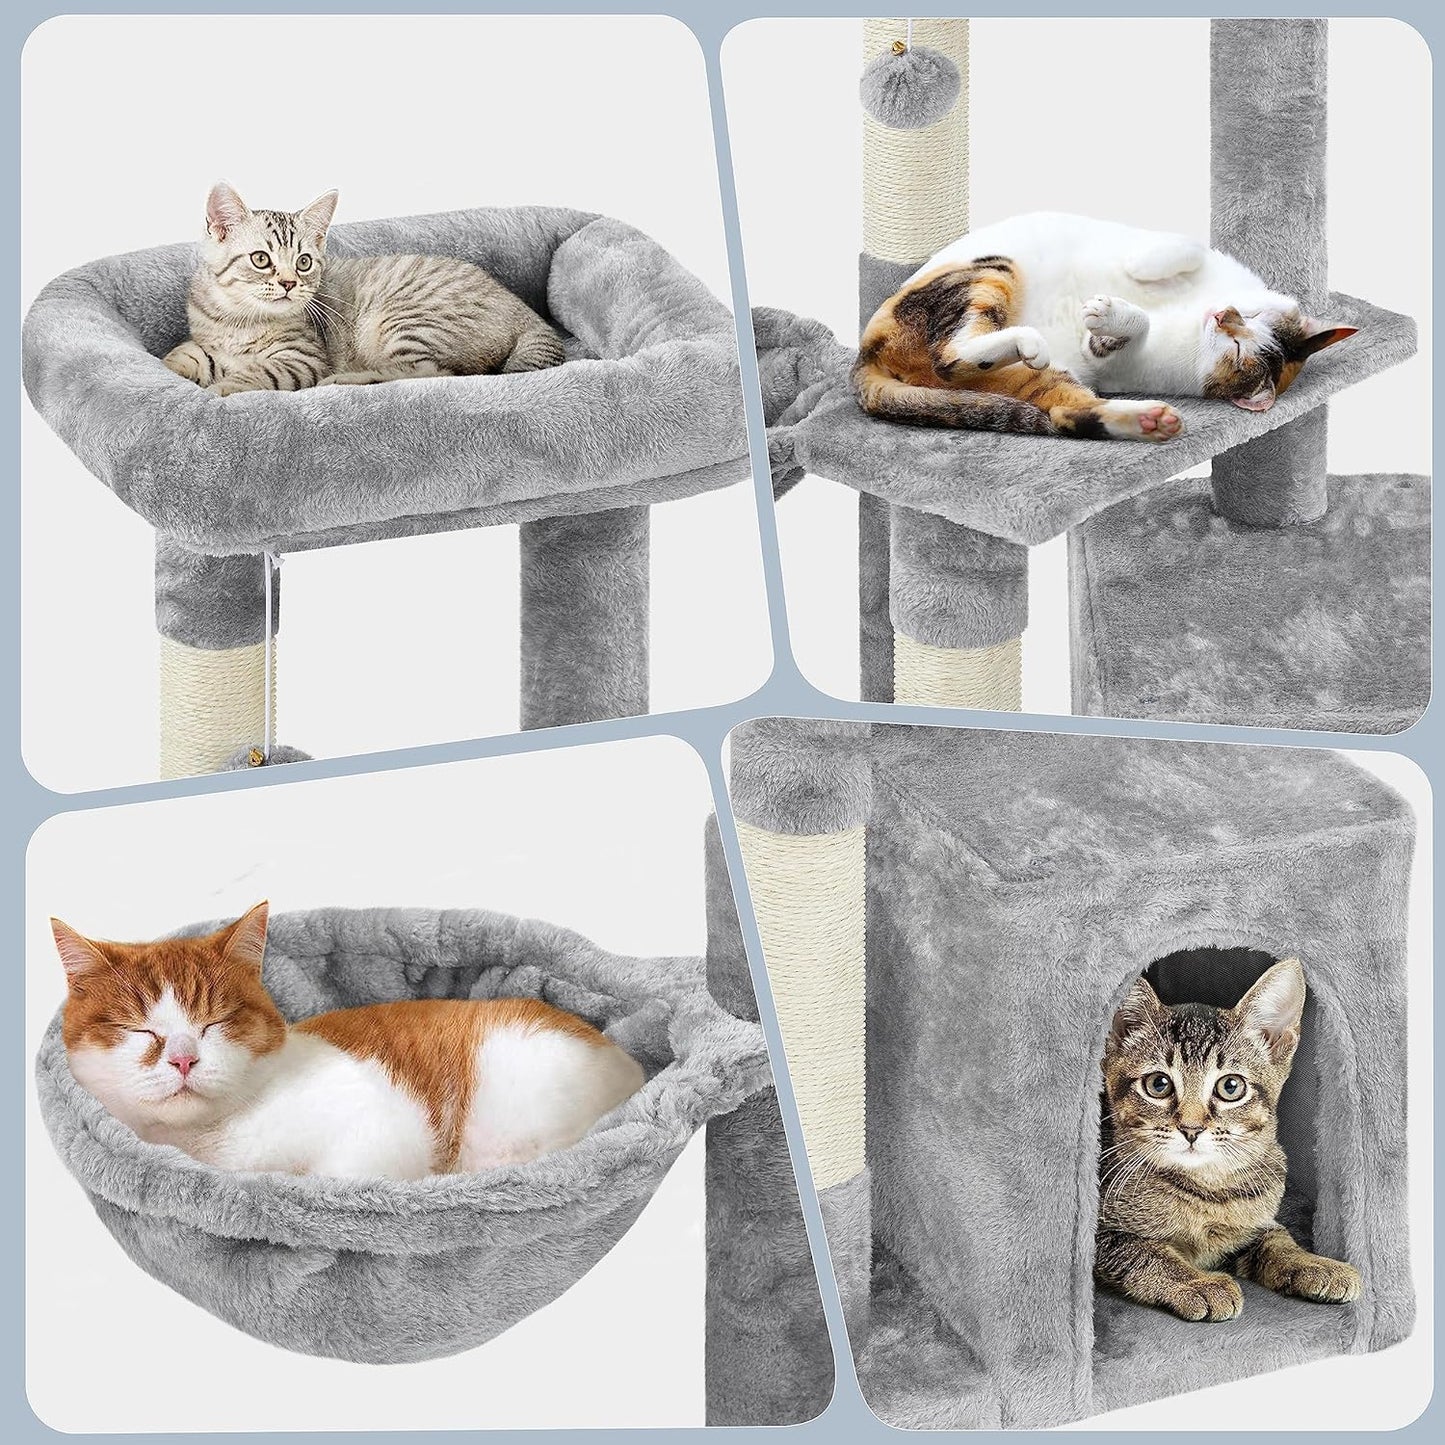 Stylish 4.5'' Light Gray Cat Tree Condo with Scratching Post Tower, Basket, and Sisal Ropes